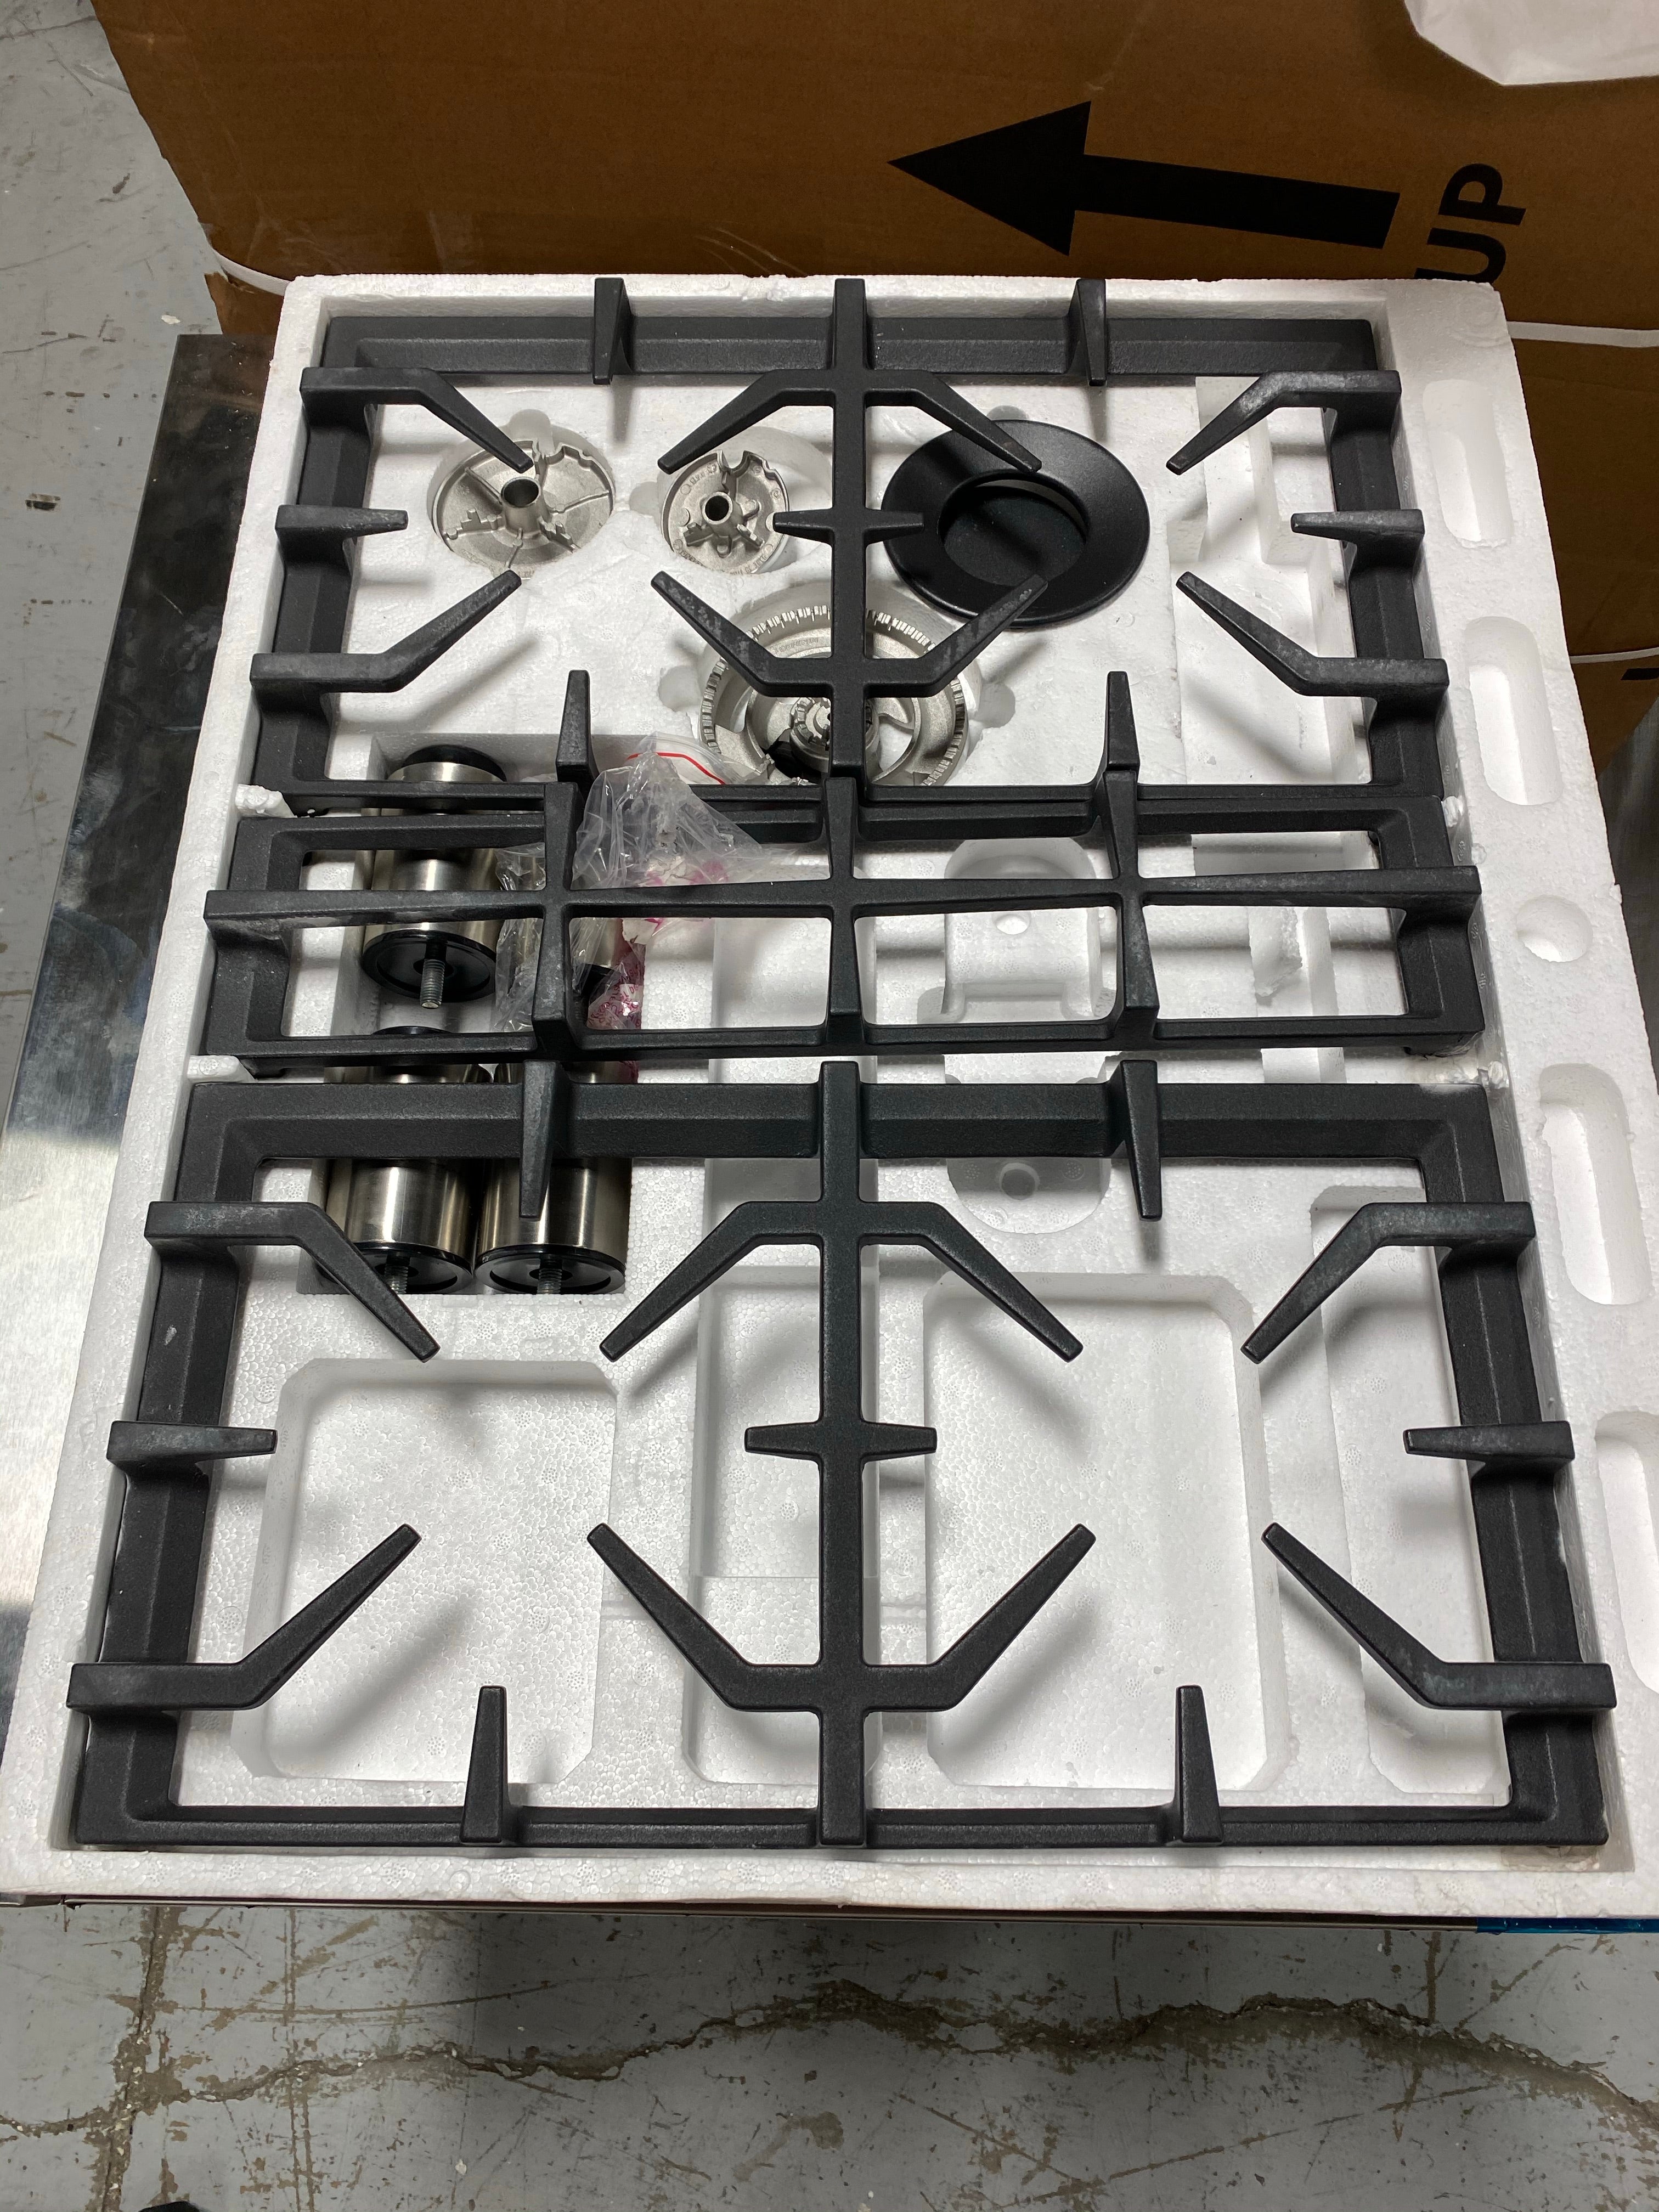 Commercial-Style 30" Dual Fuel Range with 4 Italian Burners Cast Iron Grates  #SA1090